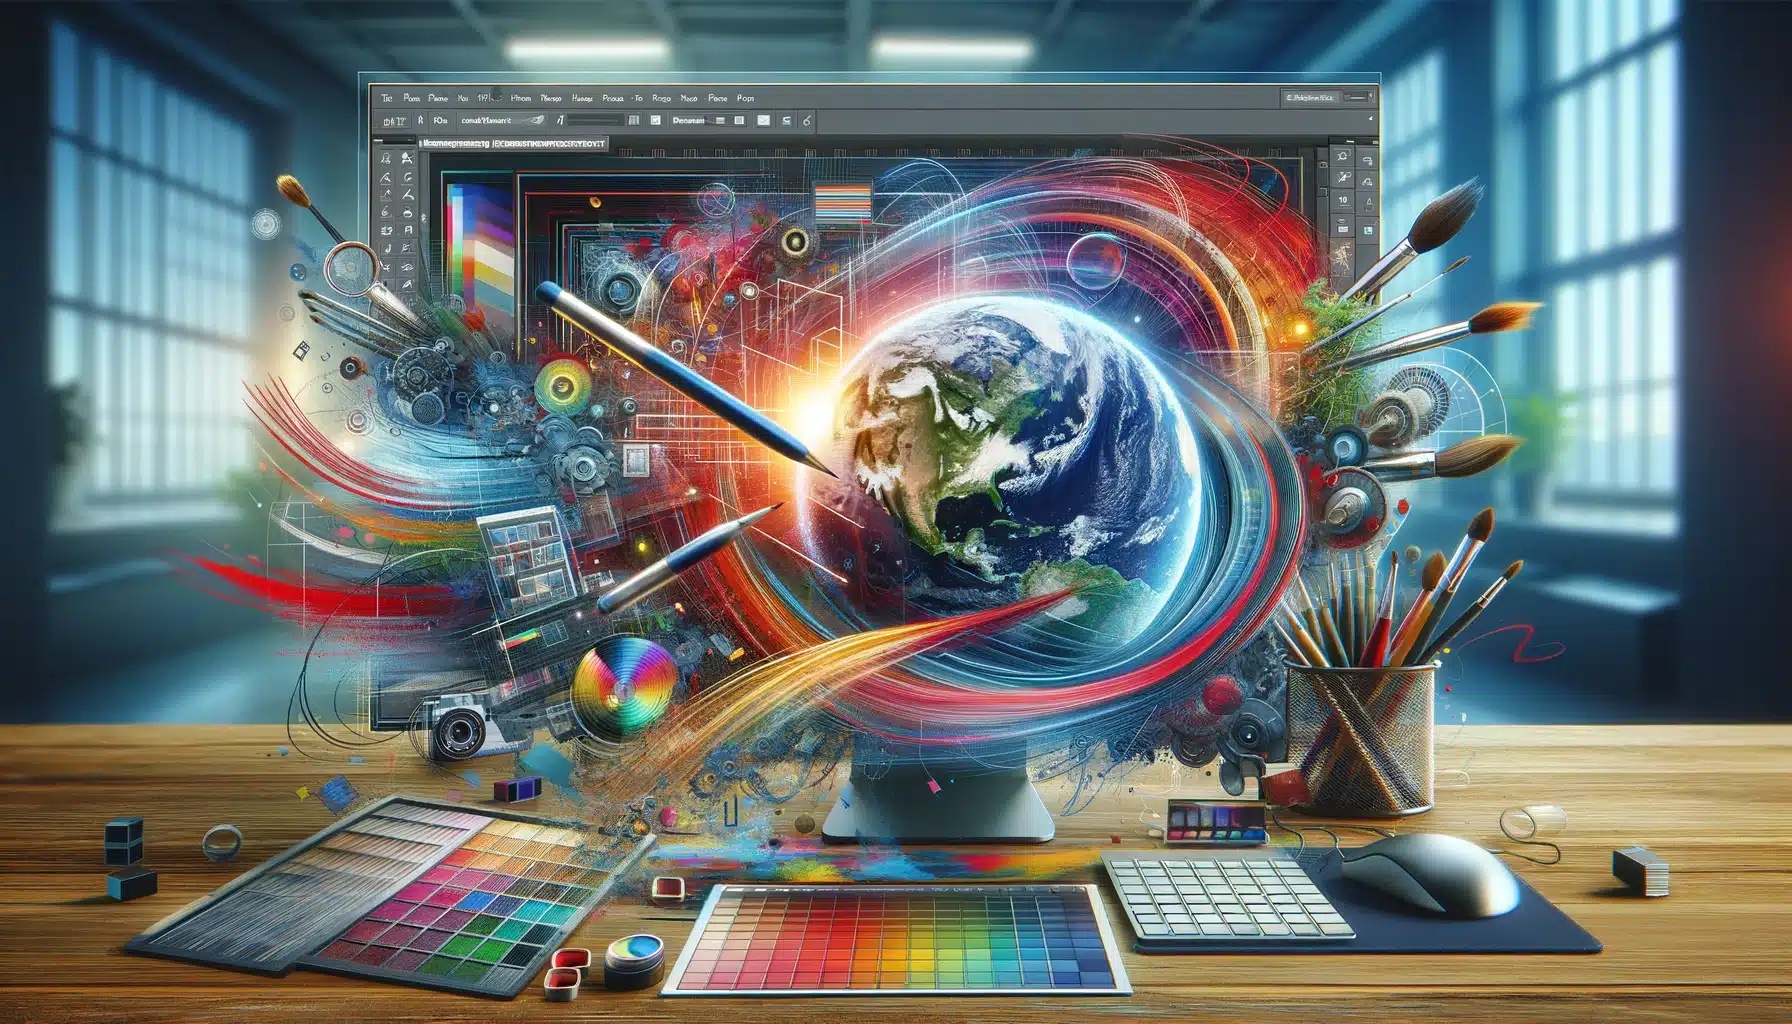 A digital art workspace showing Photoshop tools like layers, brushes, and color palettes in use, without human presence.